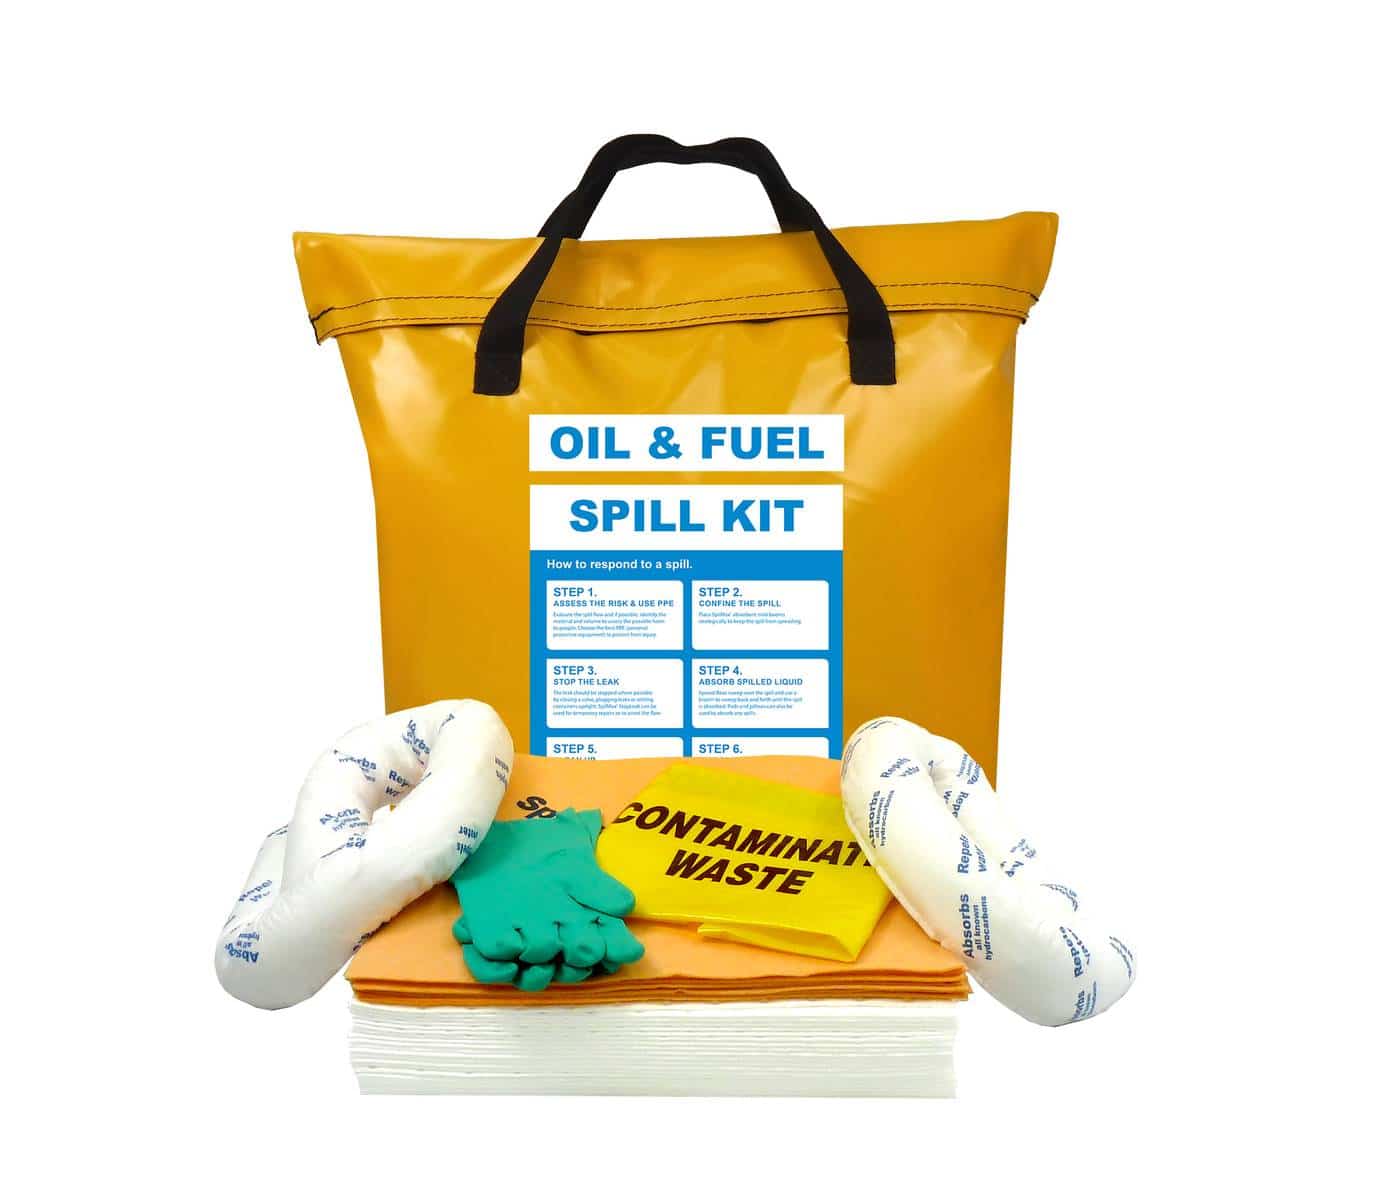 SpilMax 50L Oil & Fuel Vehicle Spill Kit Bag with contents showing